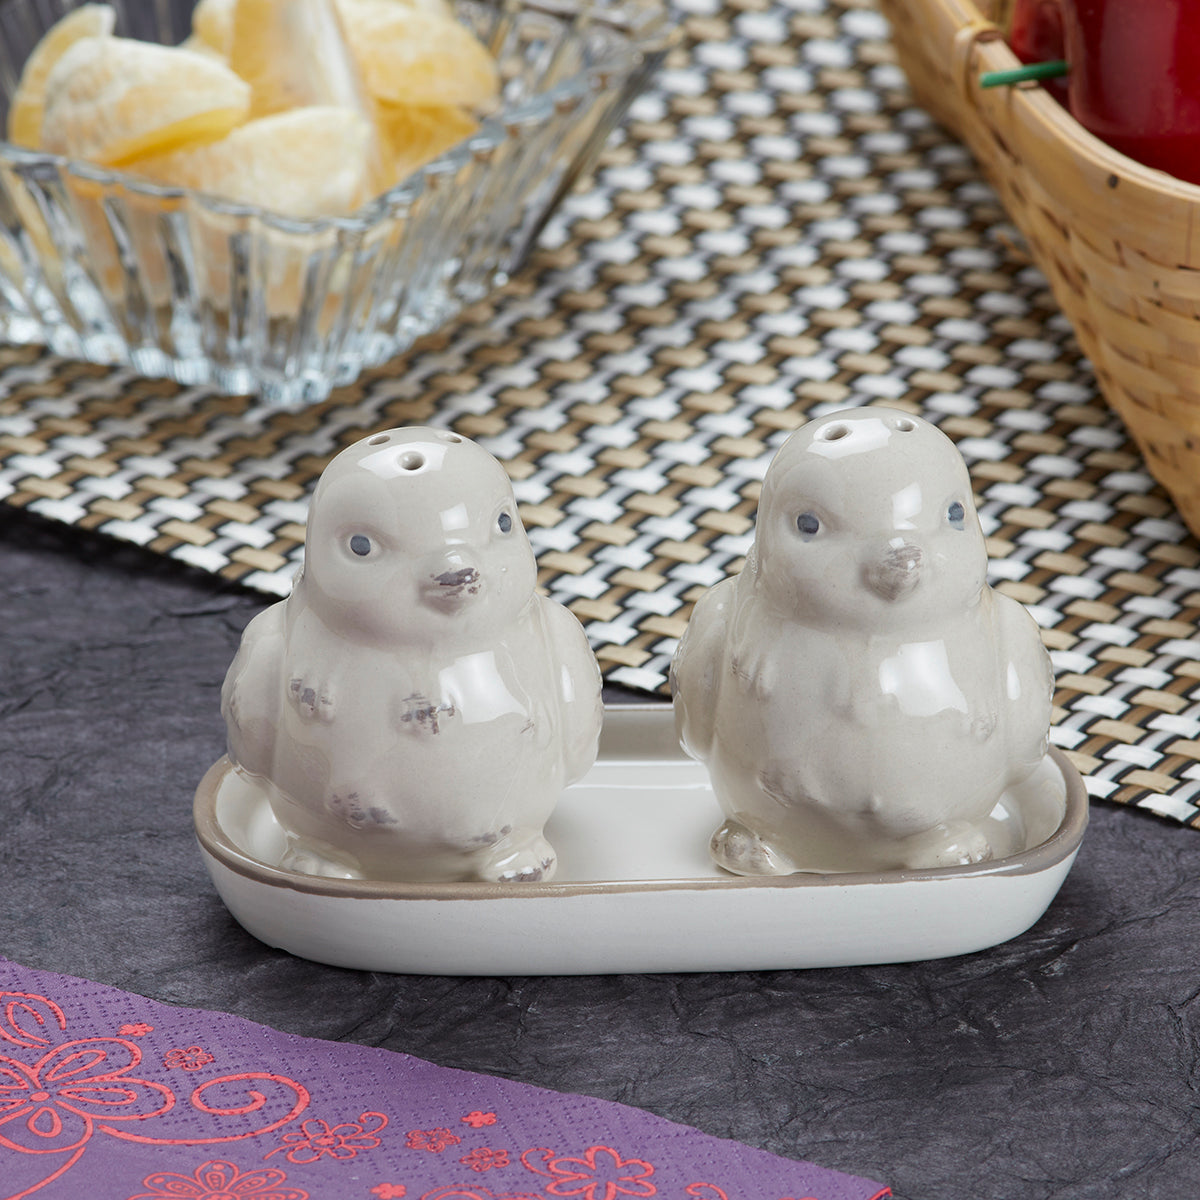 Ceramic Salt Pepper Container Set with tray for Dining Table (9976)